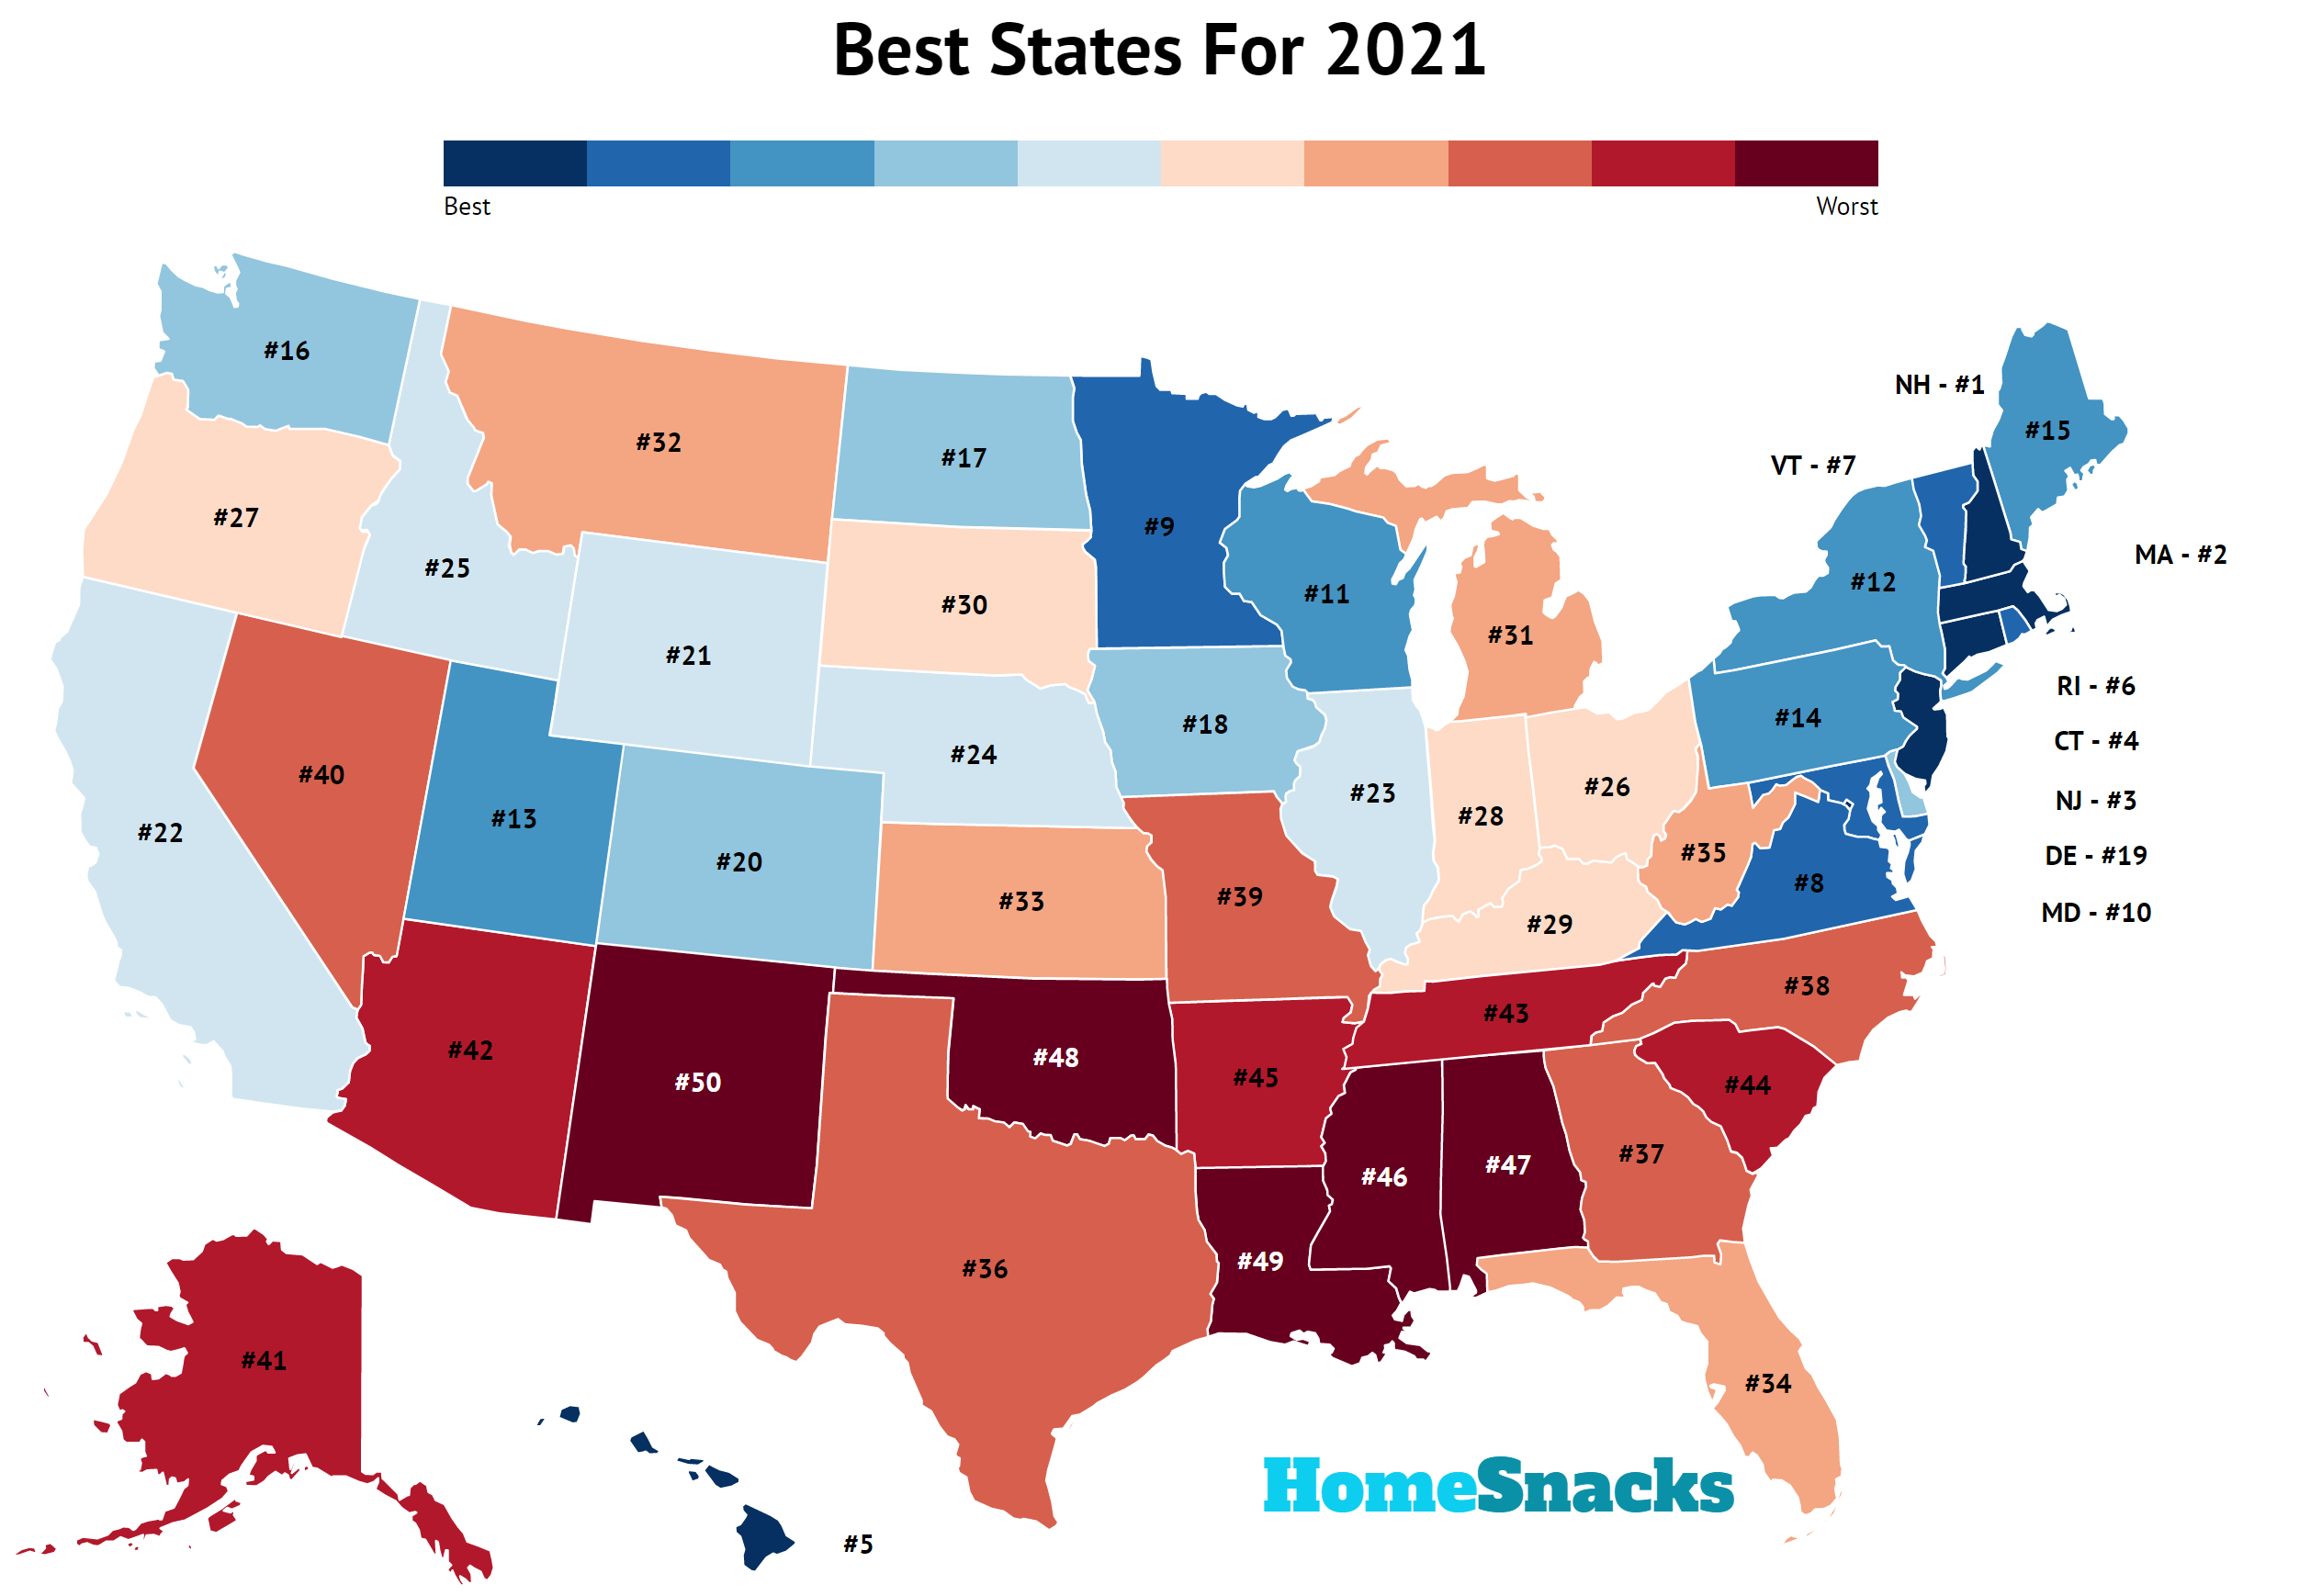 What is the best state to live in 2021?